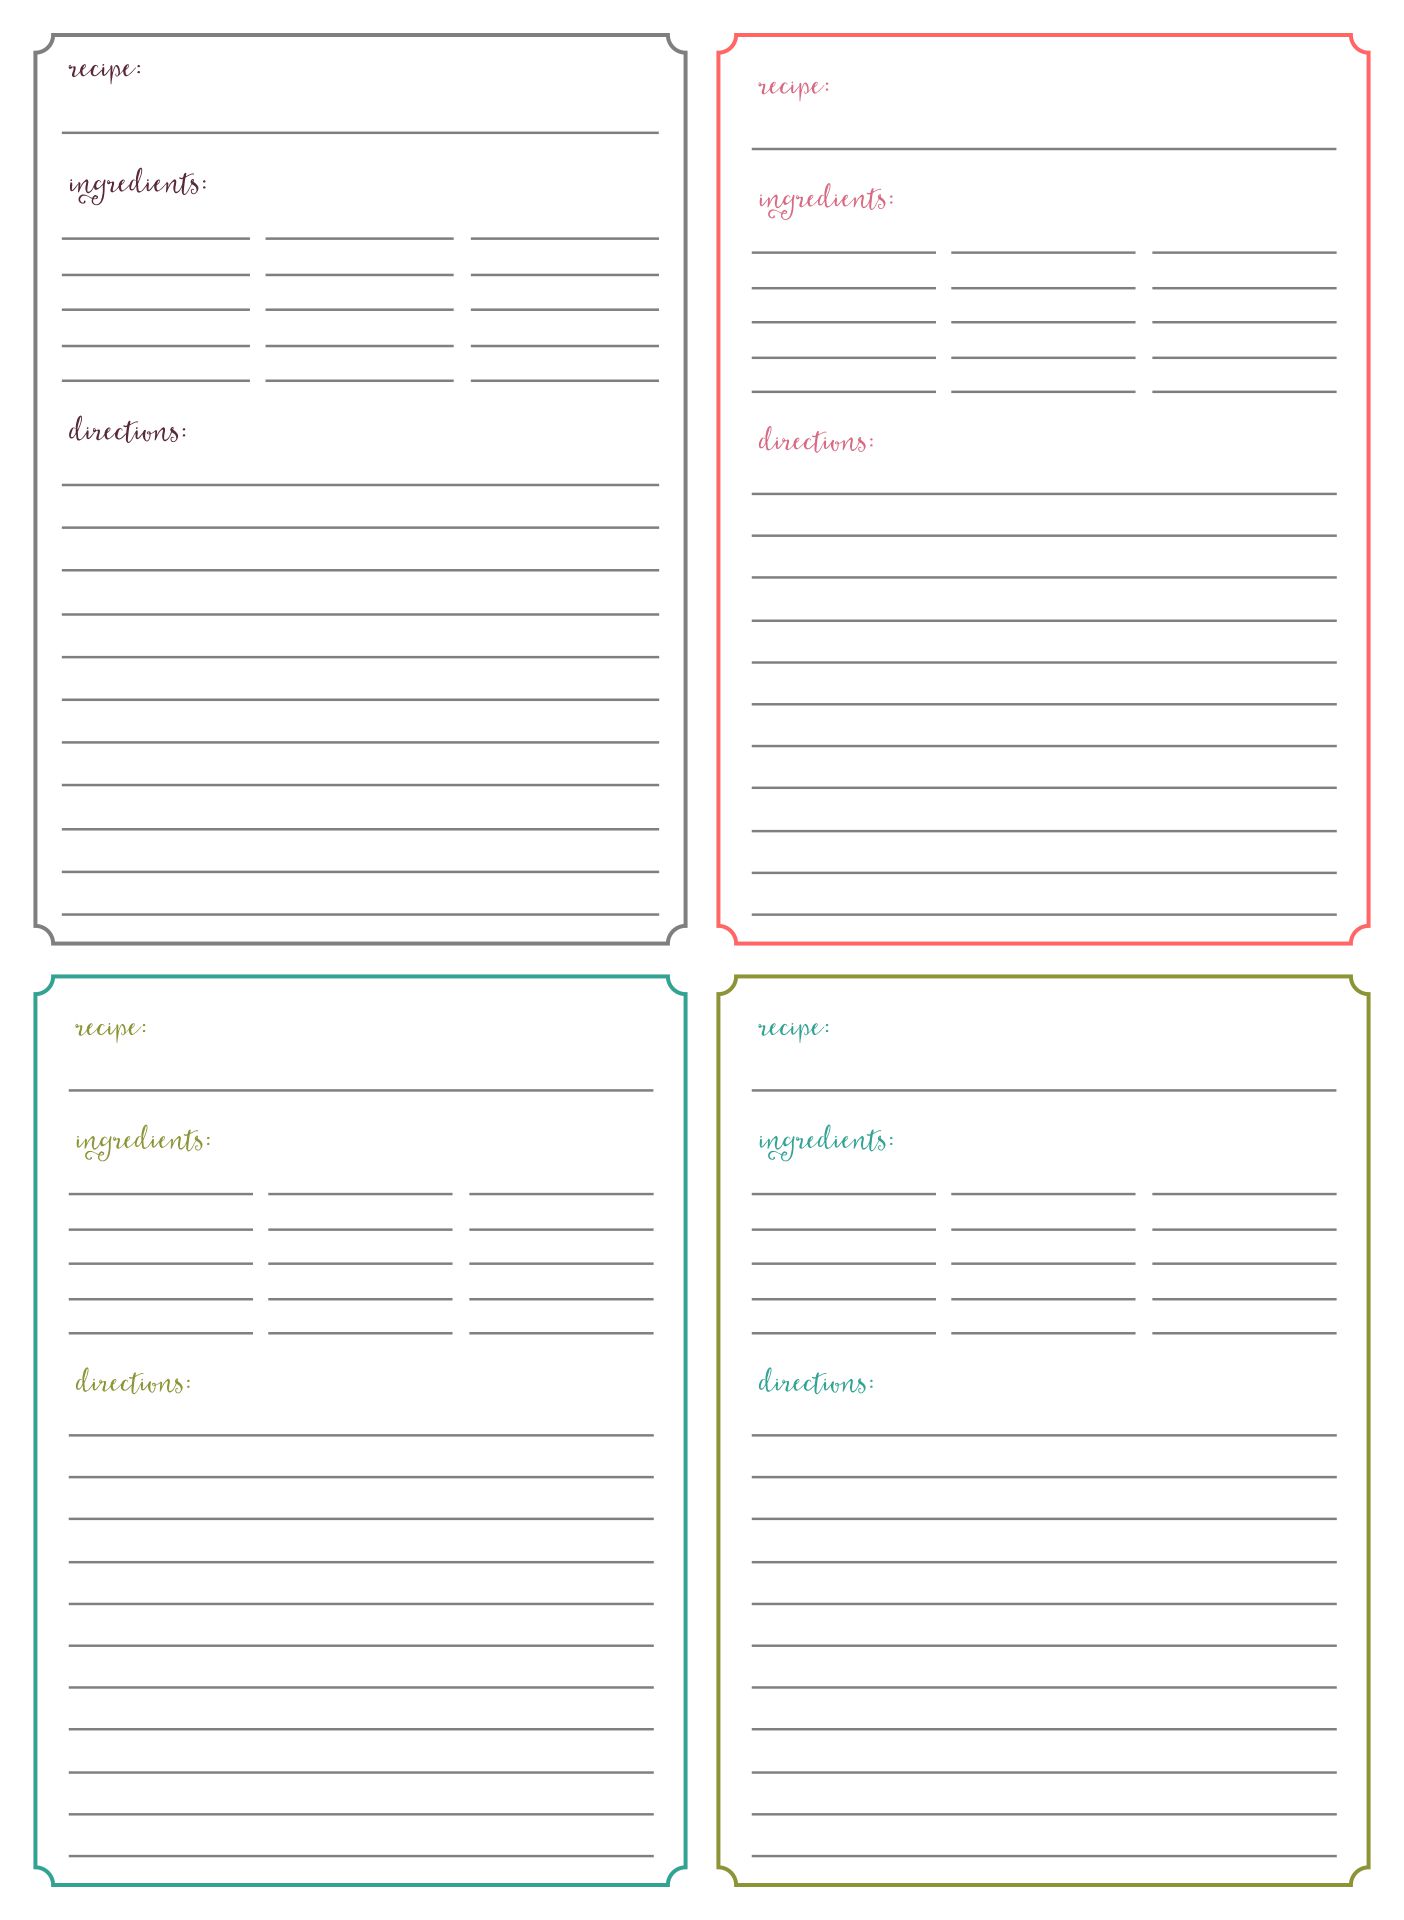 Printable Recipe Book Pages